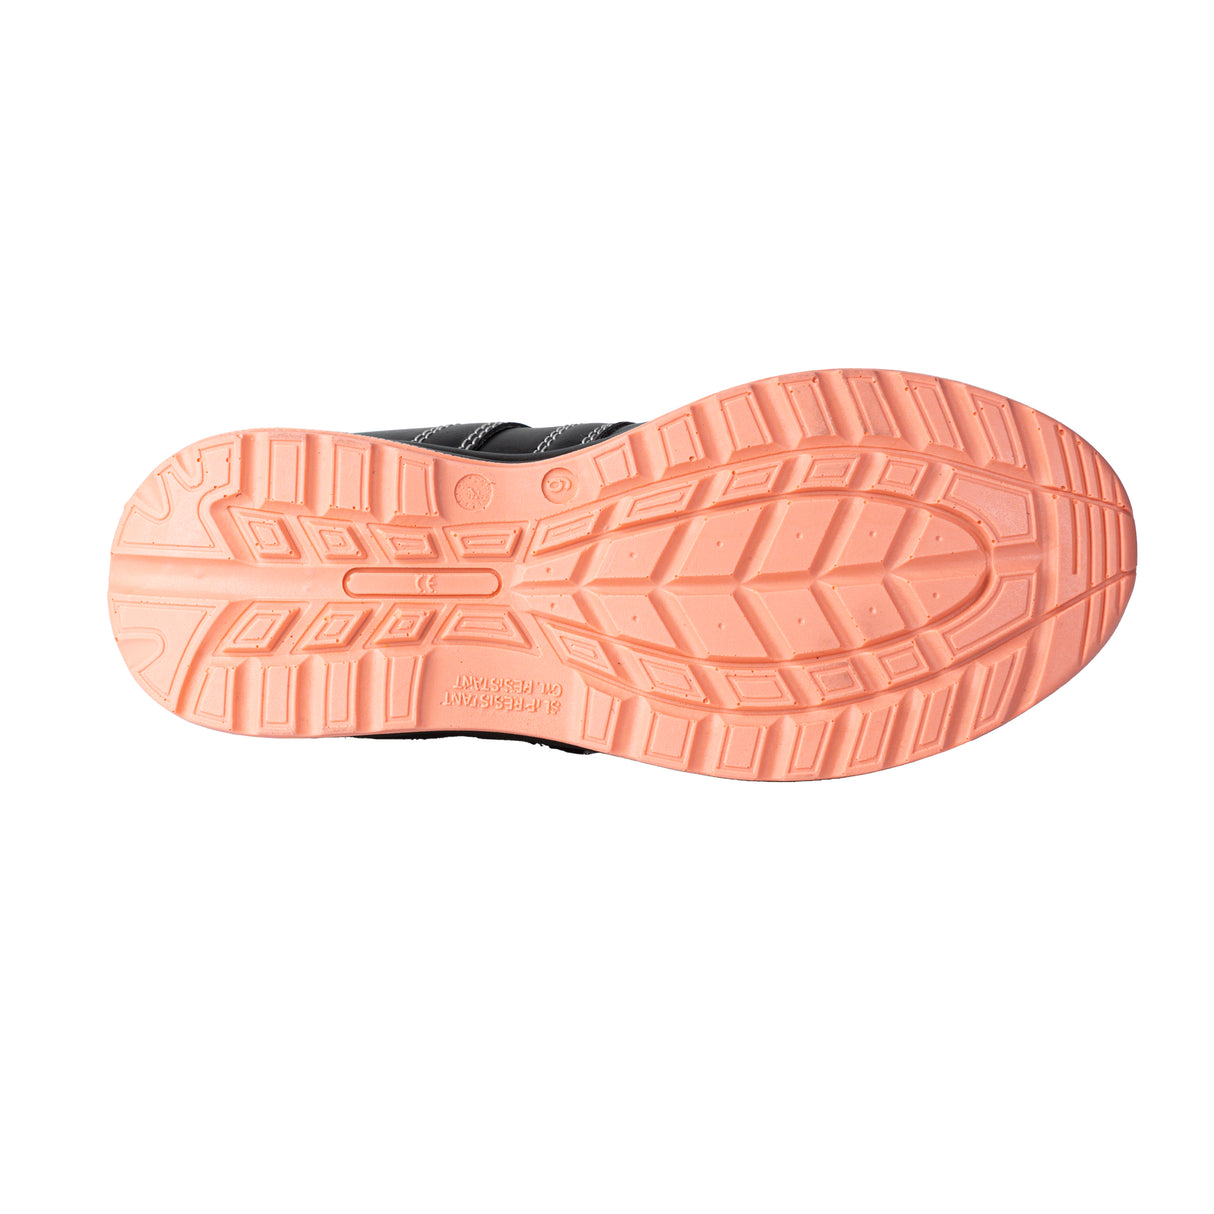 Womens Composite Toe Cap With Midsole Protection